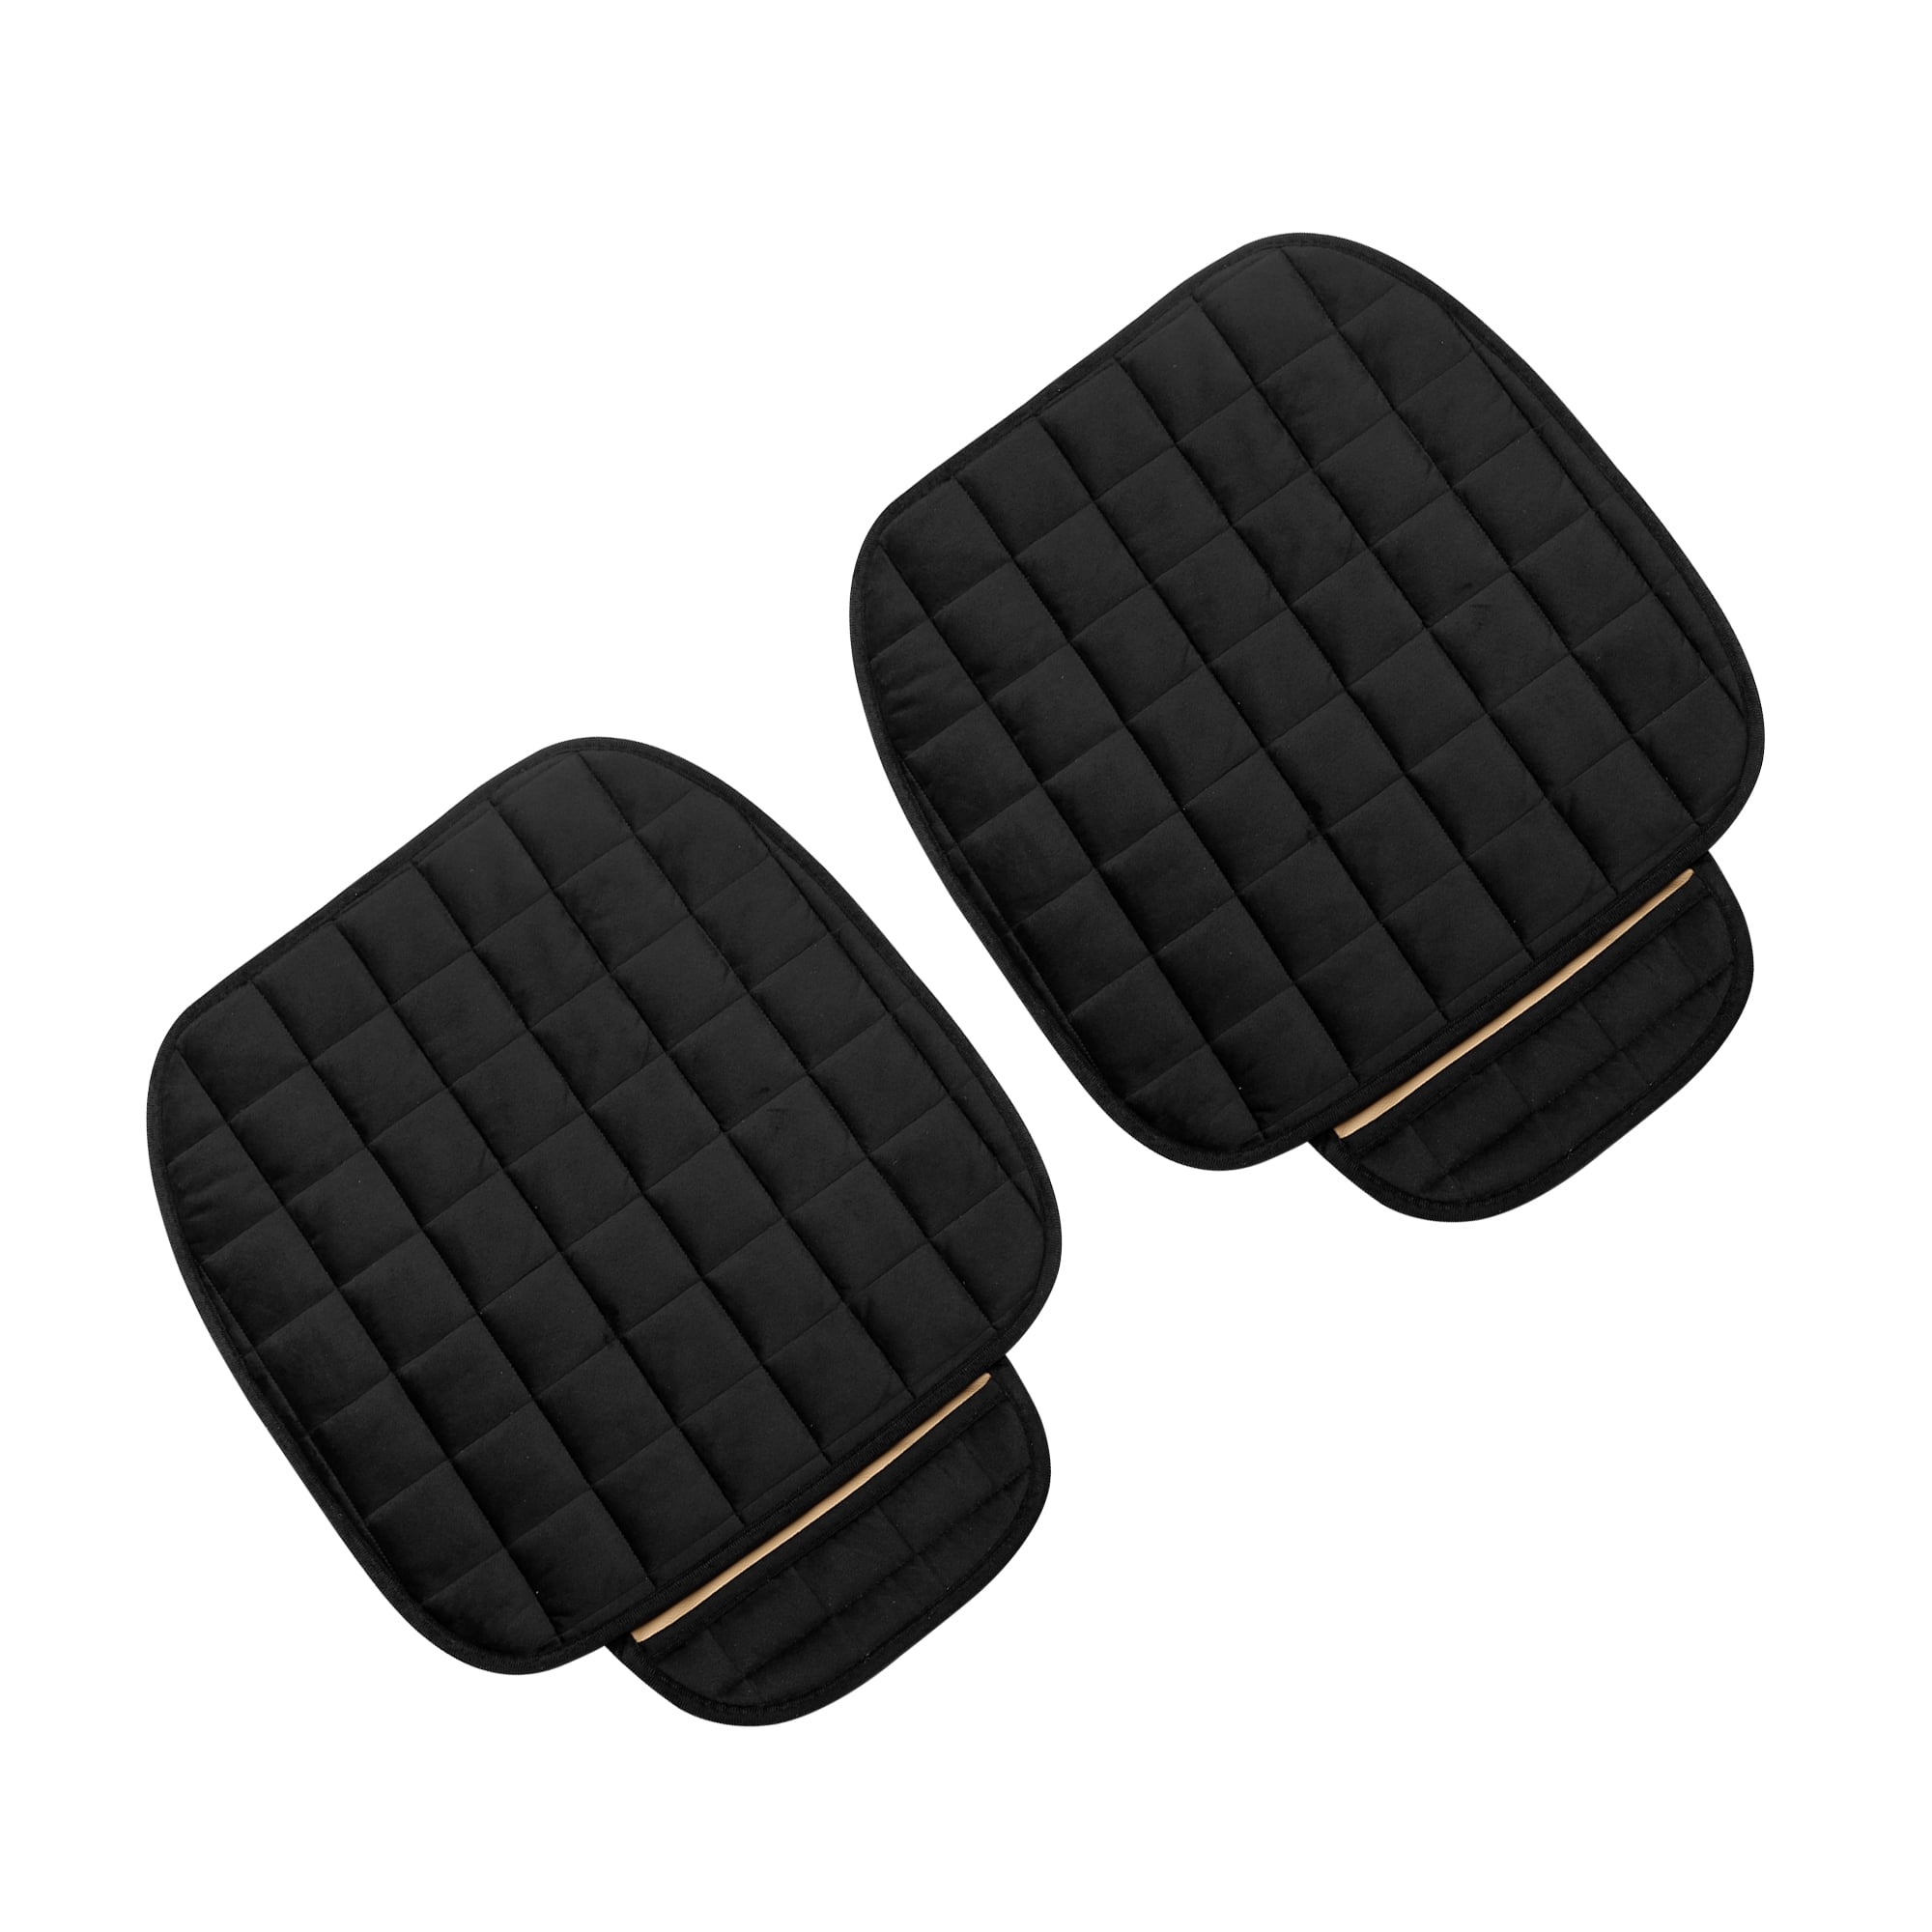 Unique Bargains 2 Pcs Front Car Seat Cover Breathable Plush Pad Chair Cushion for Vehicle Home Office Universal Black, Size: 2pc Front Seat